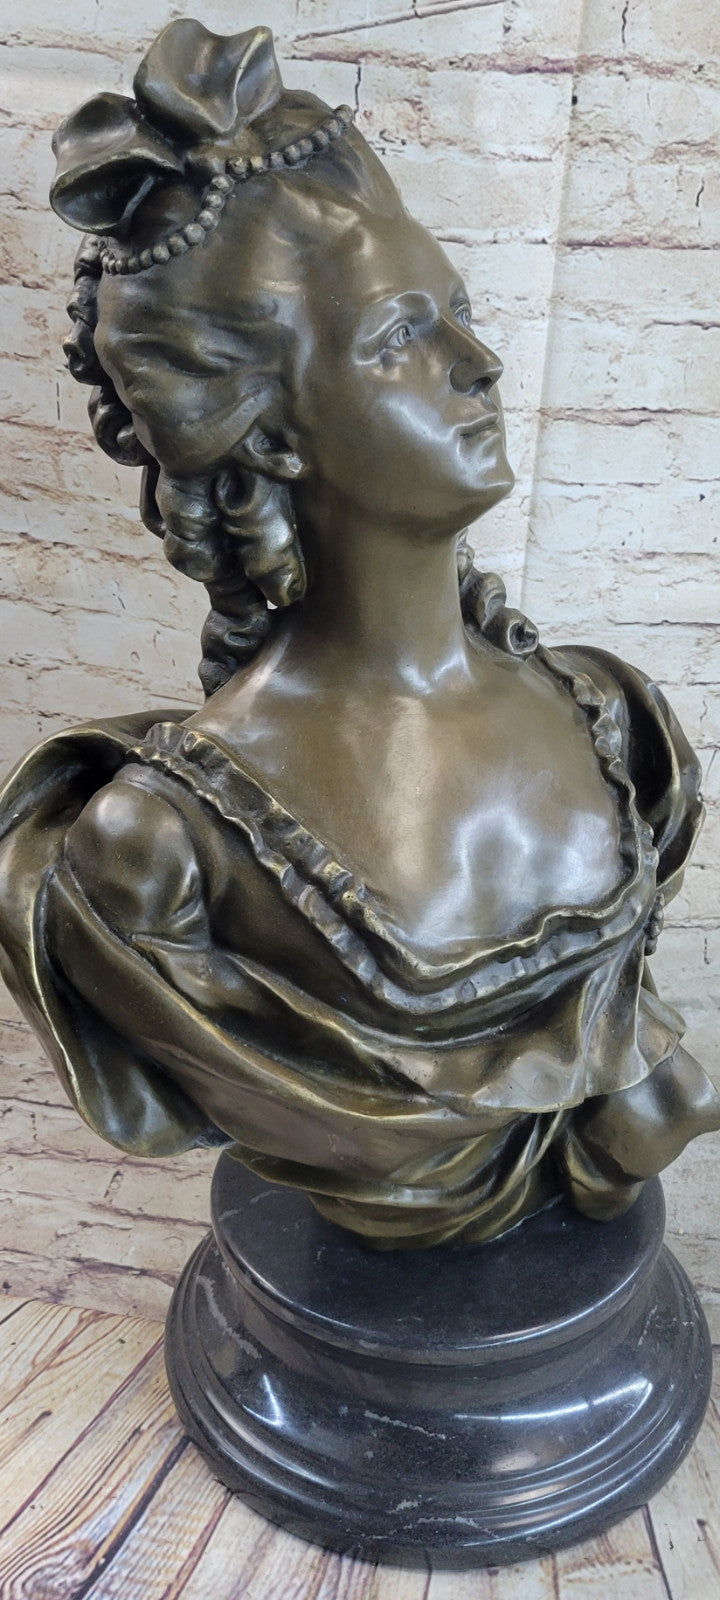 Vintage Oversized Parian Bust of Marie Antoinette after Gerome French Artist